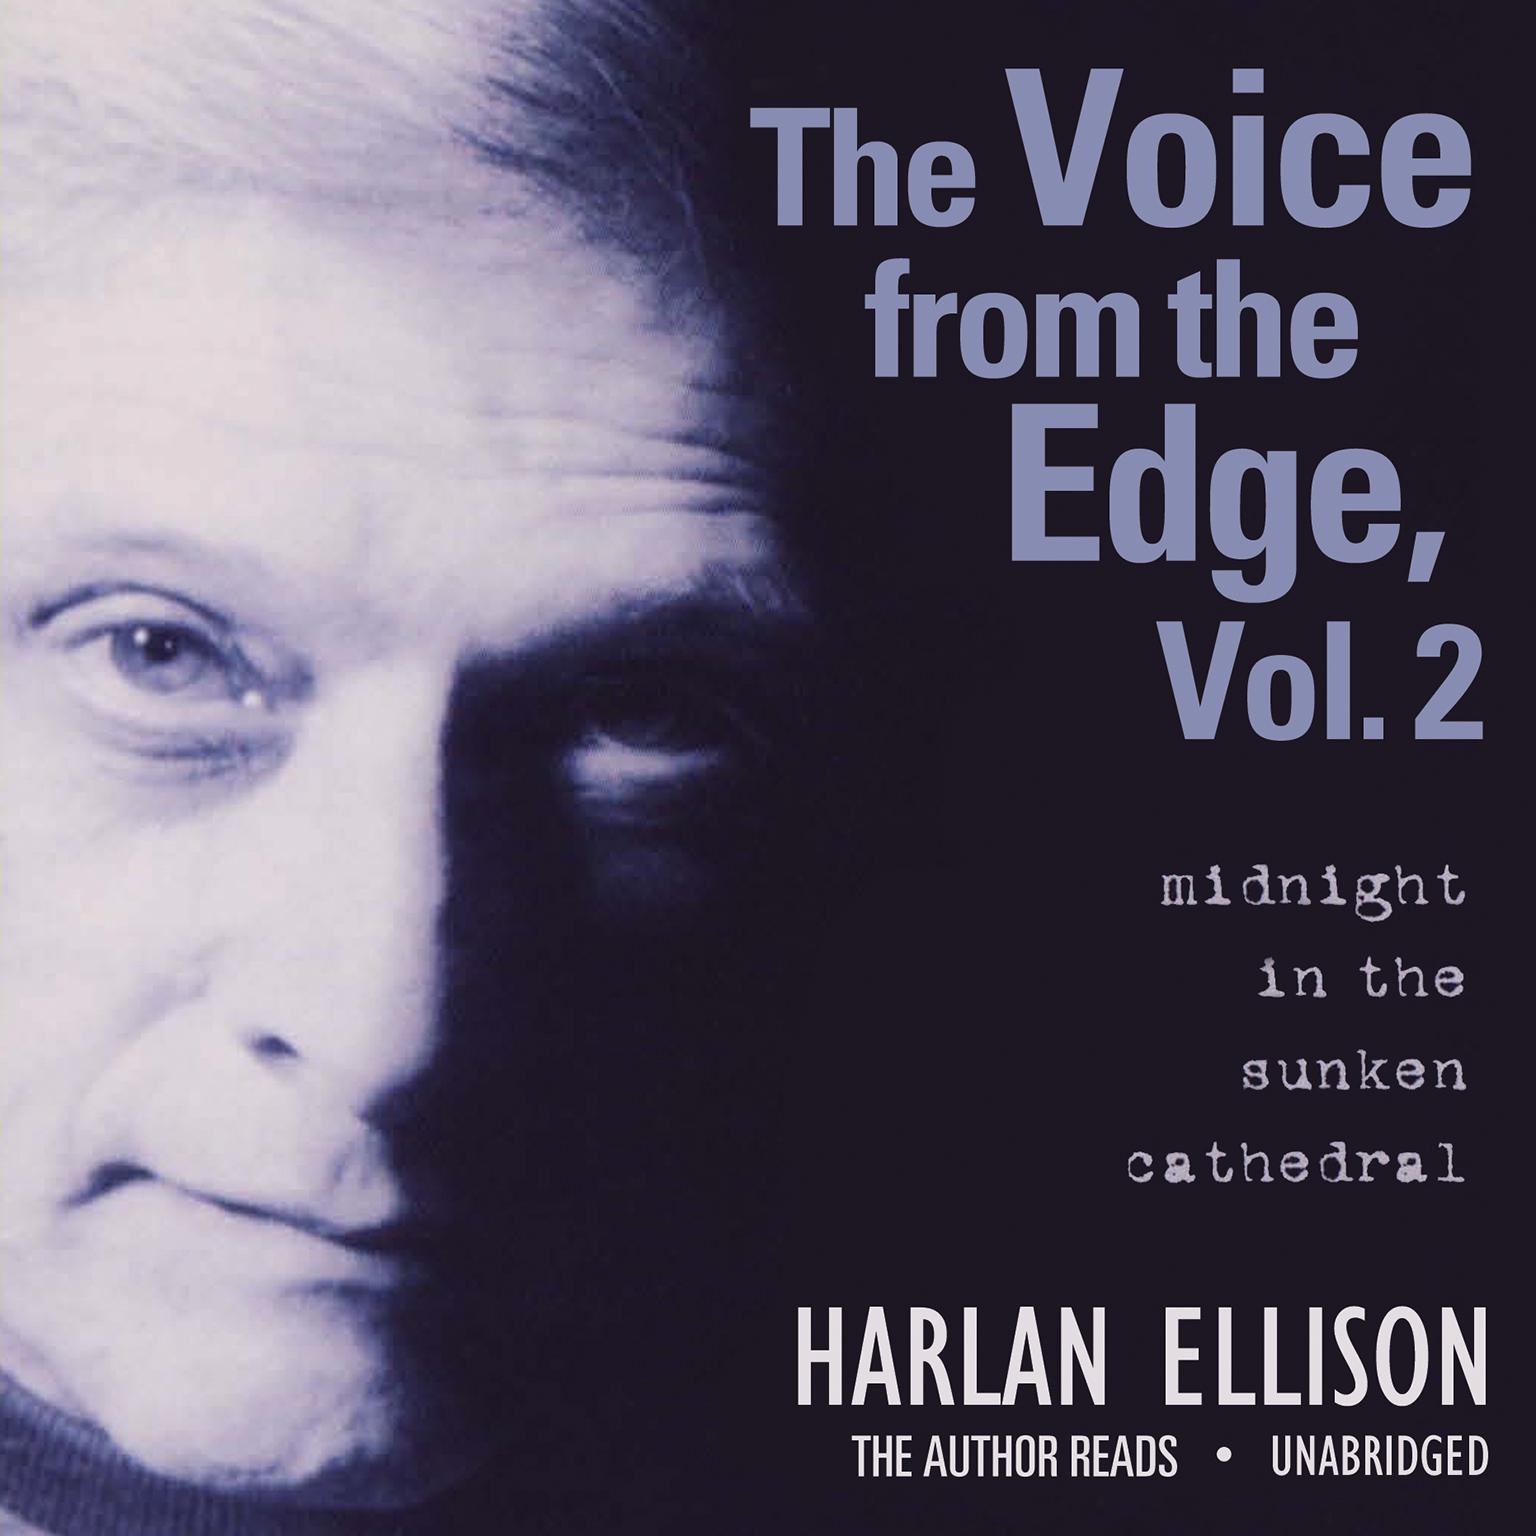 The Voice from the Edge, Vol. 2: Midnight in the Sunken Cathedral Audiobook, by Harlan Ellison